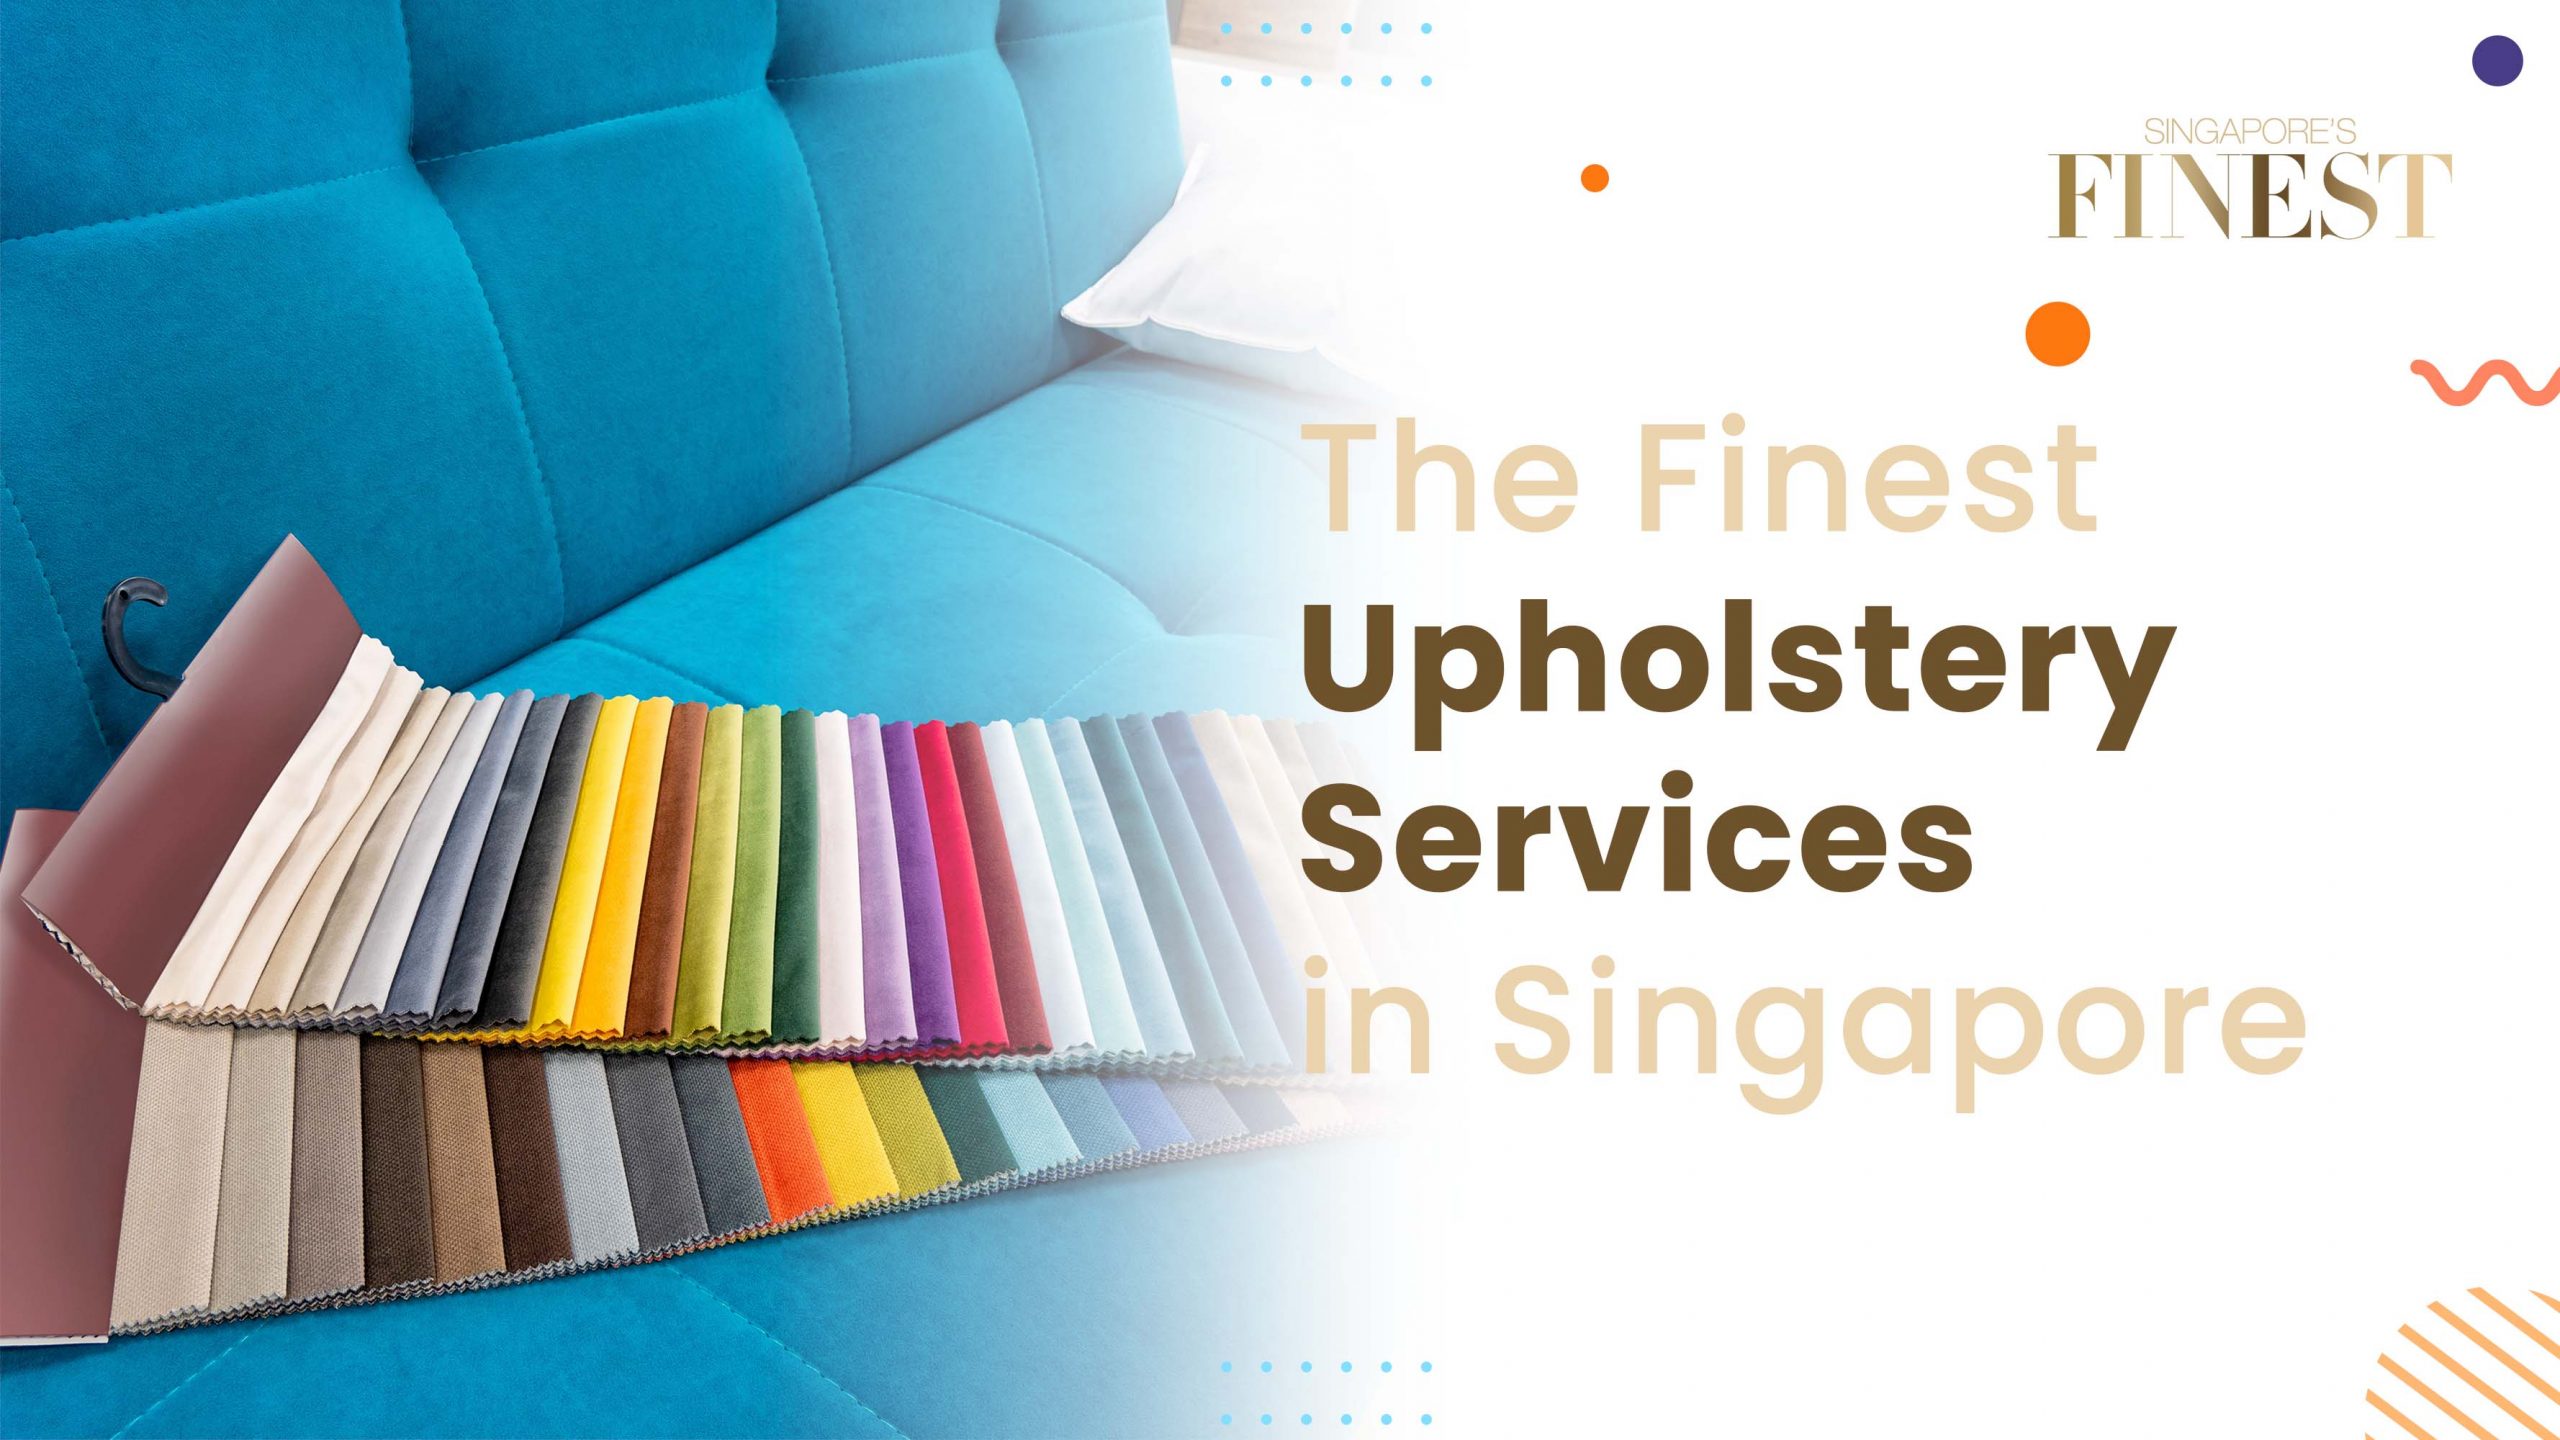 Finest Upholstery Services in Singapore